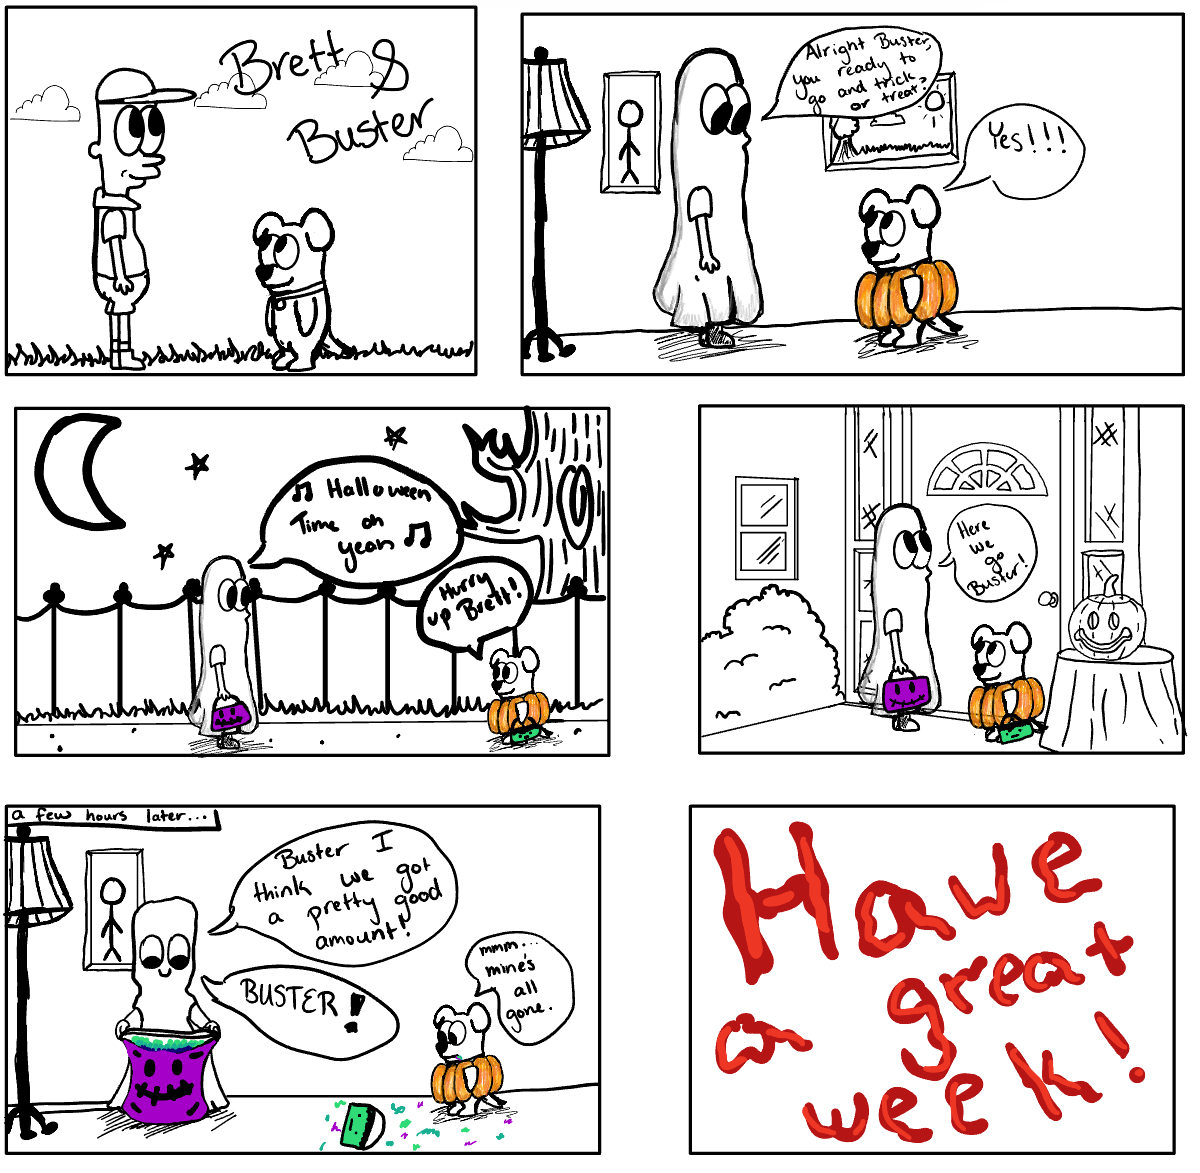 Trick-or-Treat: Brett and Buster’s Halloween Adventure